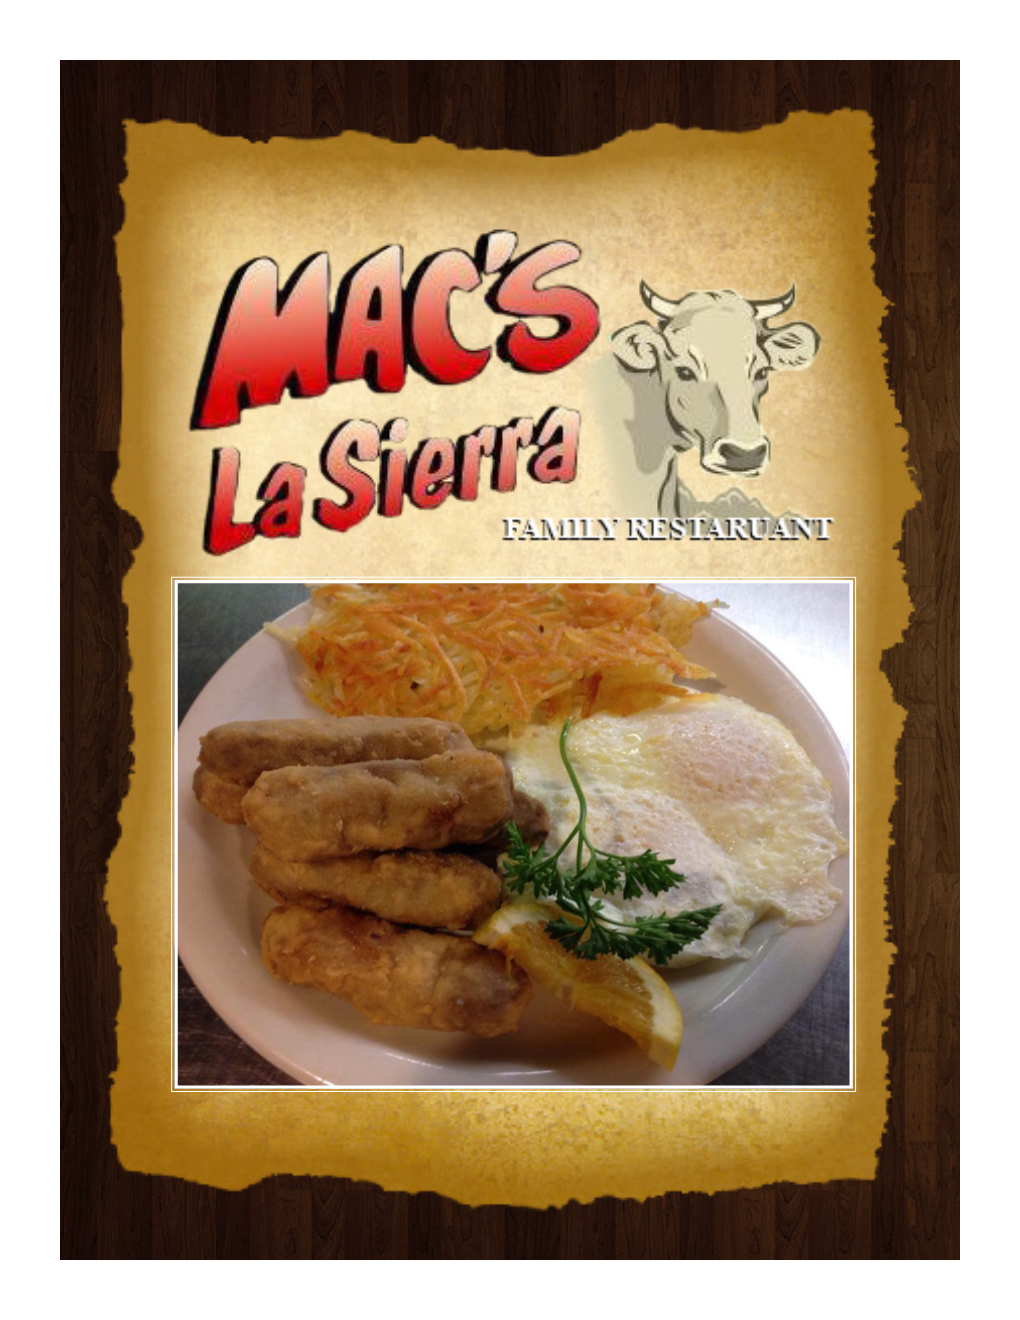 Breakfast Specials Monday - Friday Served 6:00Am to 11:00Am